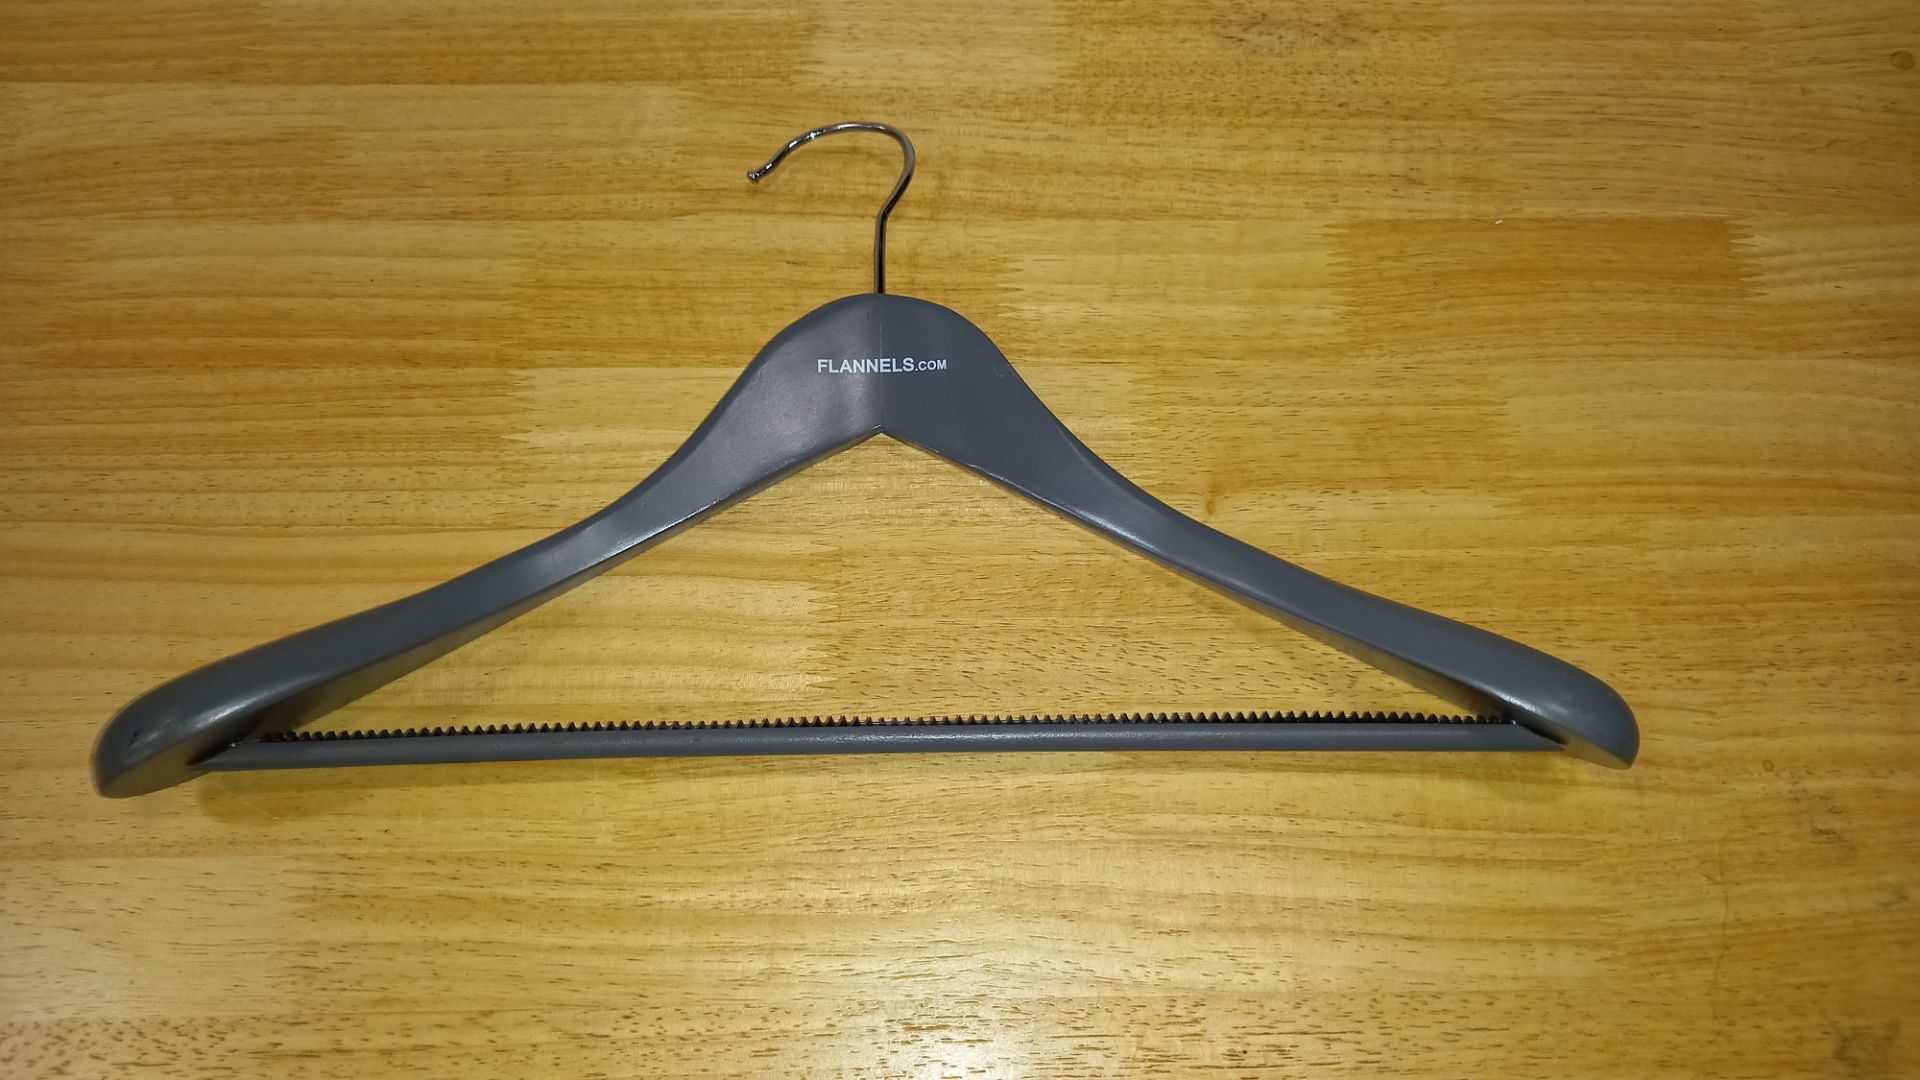 252 X BRAND NEW FLANNELS BRANDED COAT HANGERS WITH GRIPPED TROUSER BAR (IN 7 CARTONS)